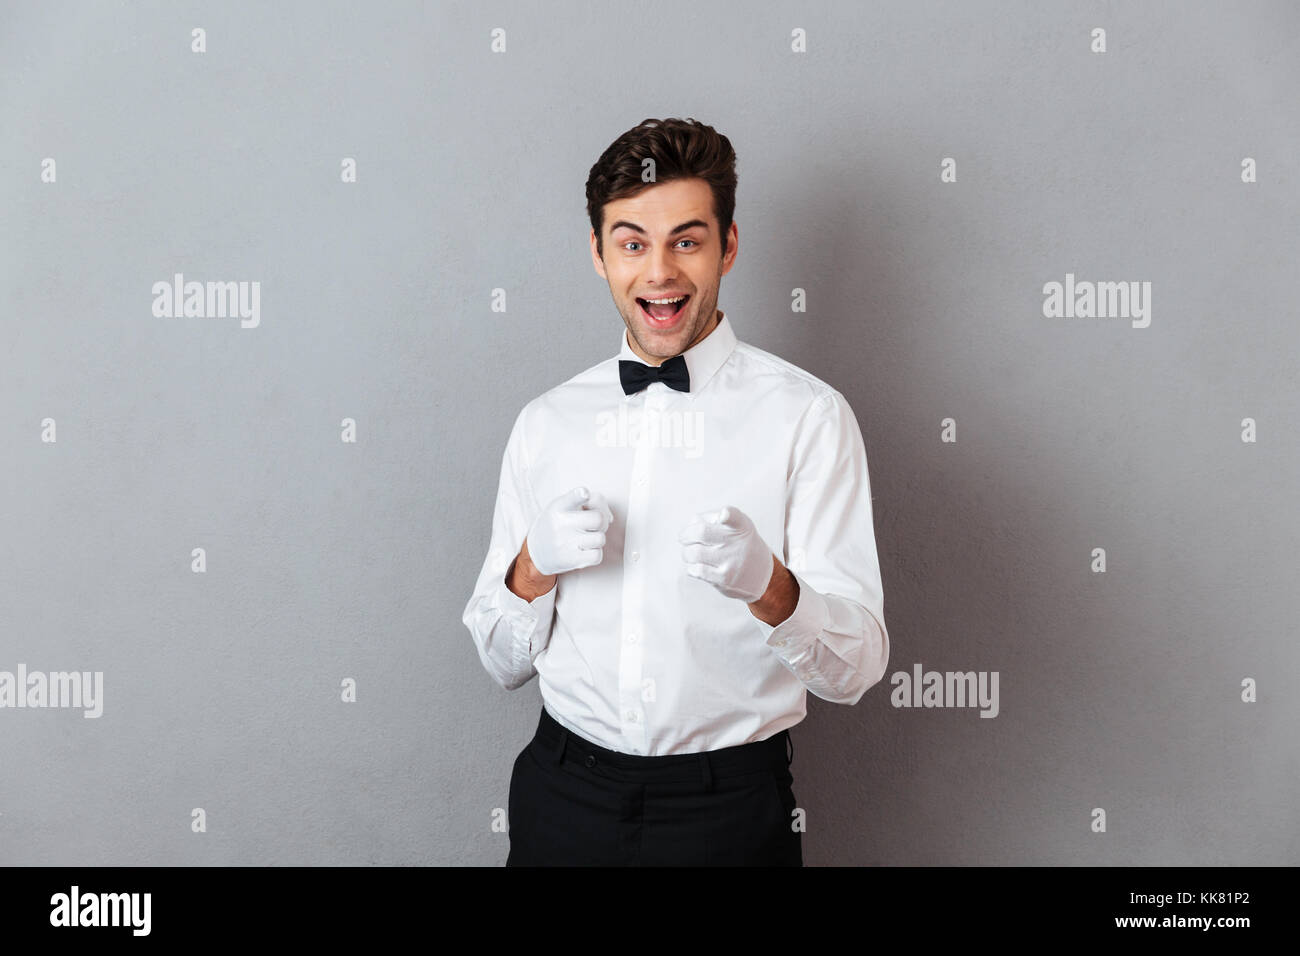 Portrait of a cheerful young male waiter dressed in unifrom pointing two fingers up at camera isolated over gray background Stock Photo